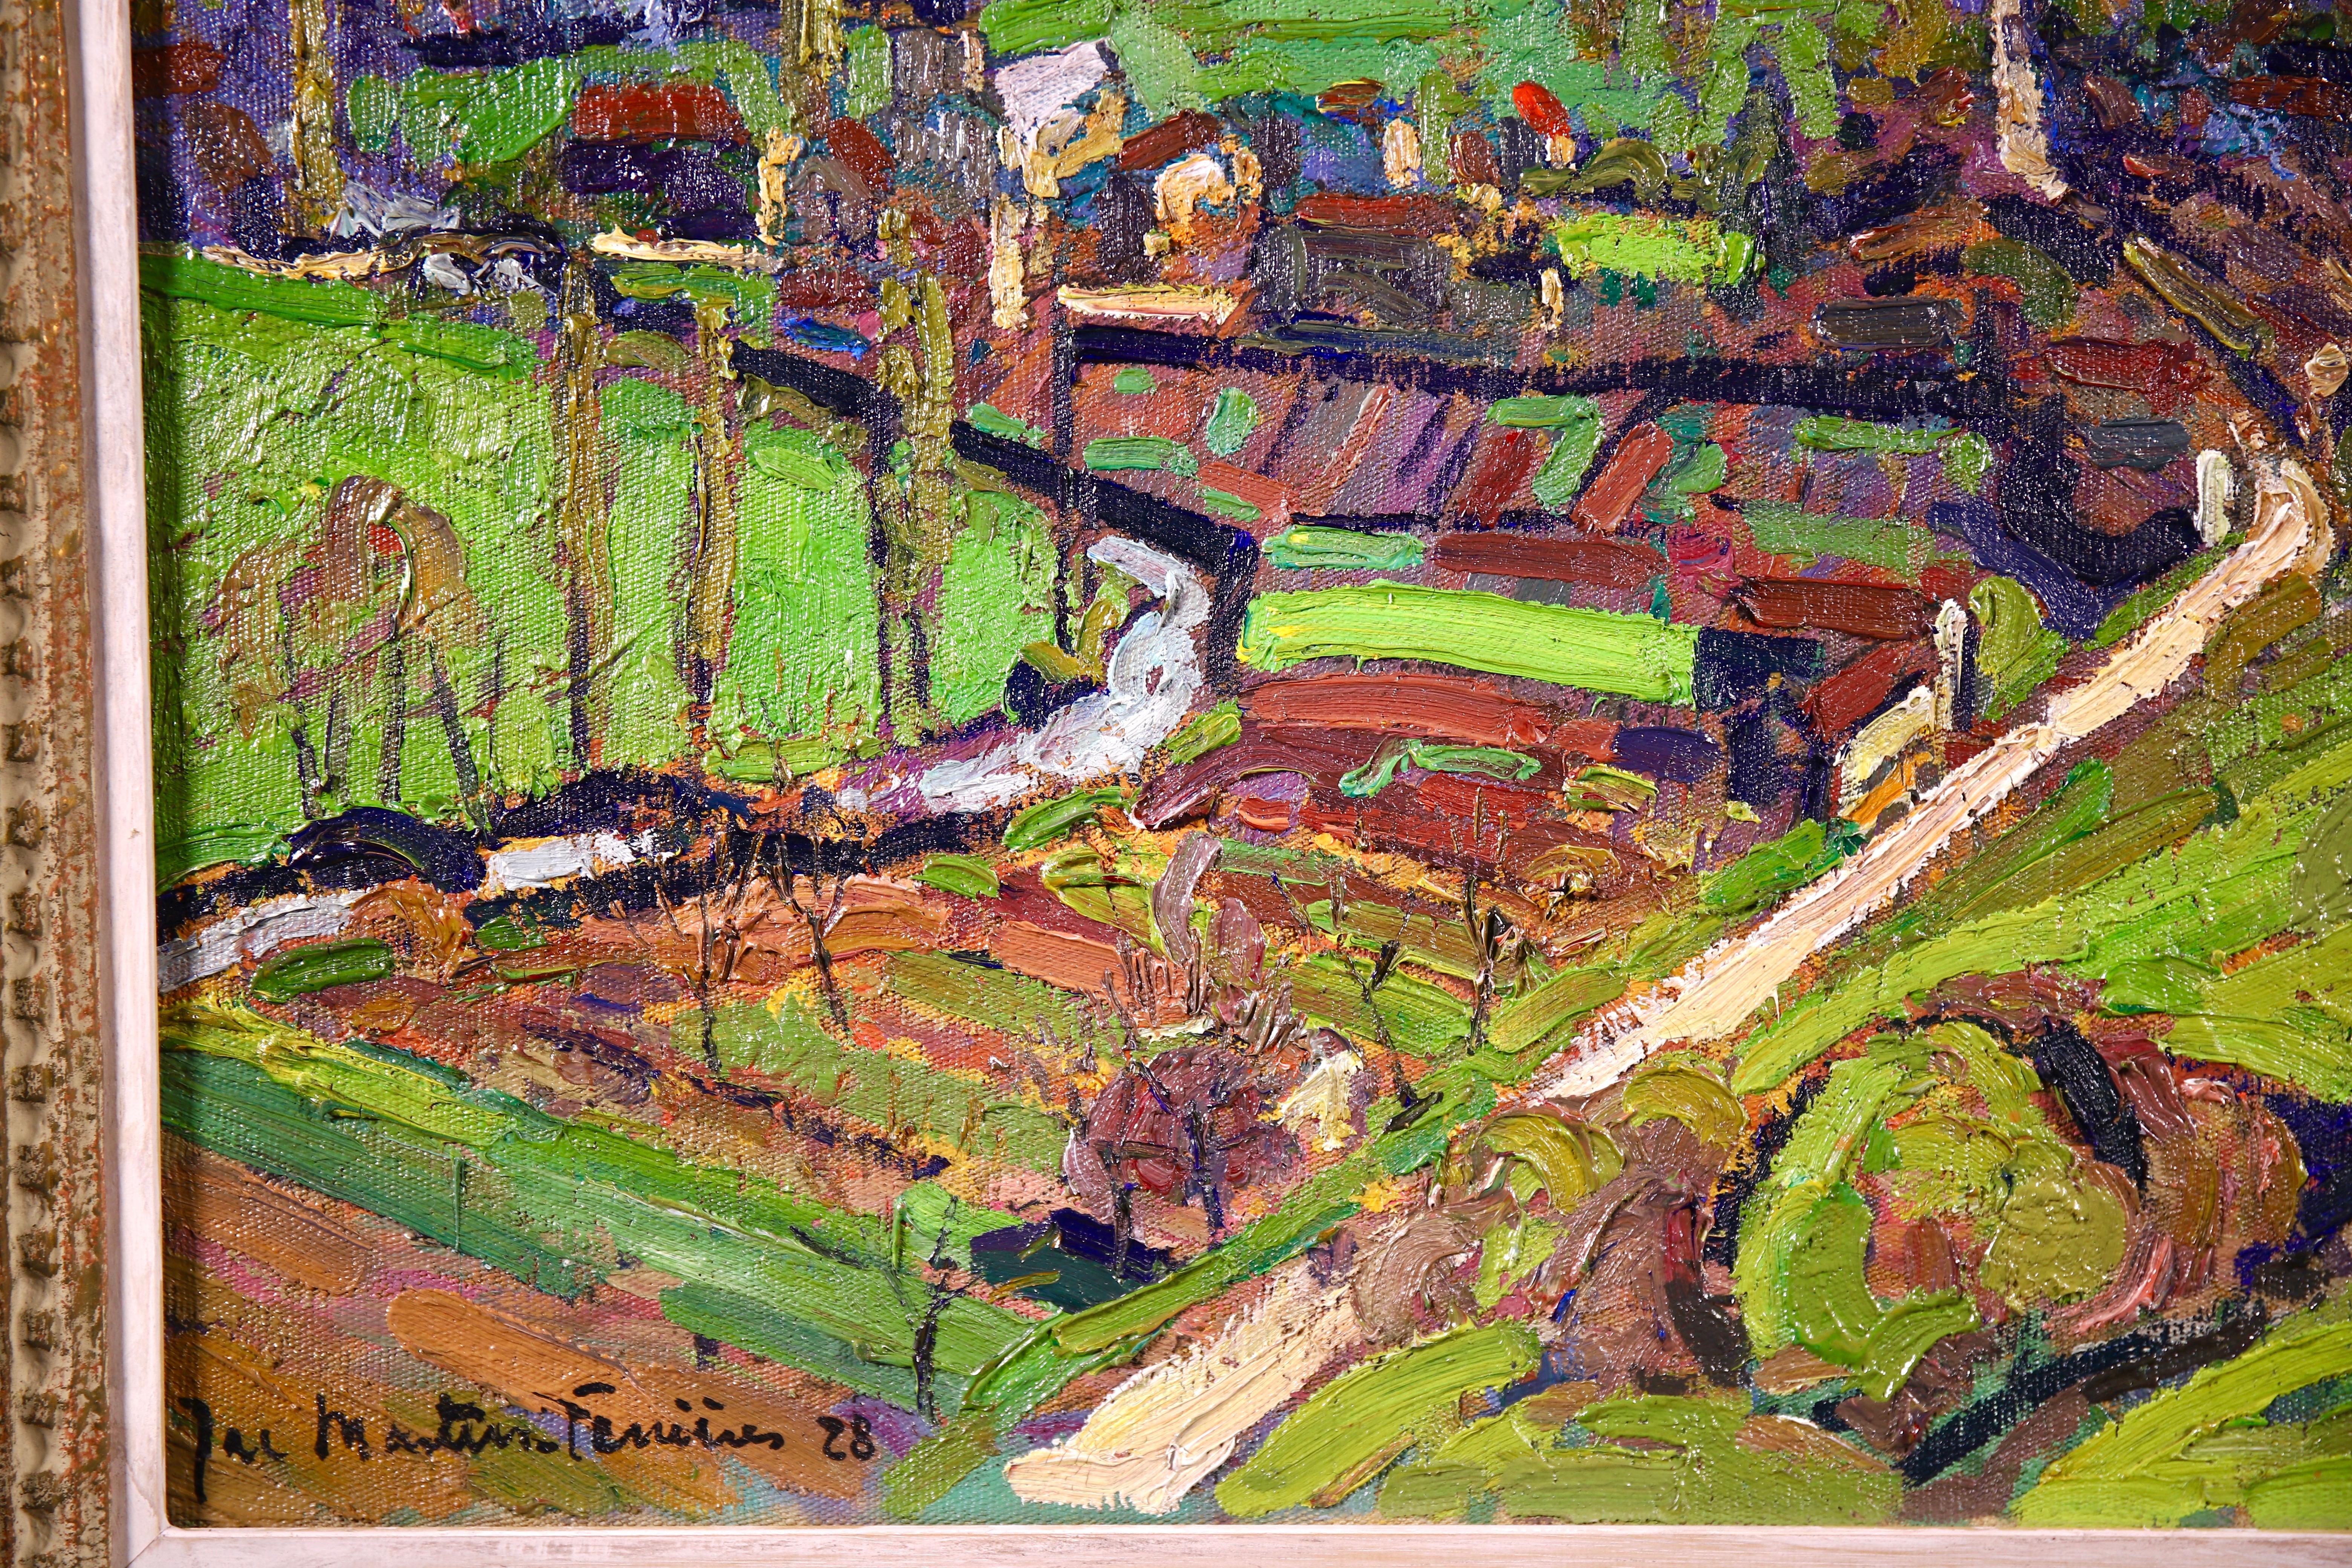 Labastide-du-Vert - the Lot Valley , France. Oil on canvas circa 1940. Signed lower left. Framed dimensions are 25 inches high by 29 inches wide.

Jacques Martin-Ferrières was a pupil of his father Henri Martin as well as Cormon, Ernest Laurent. He